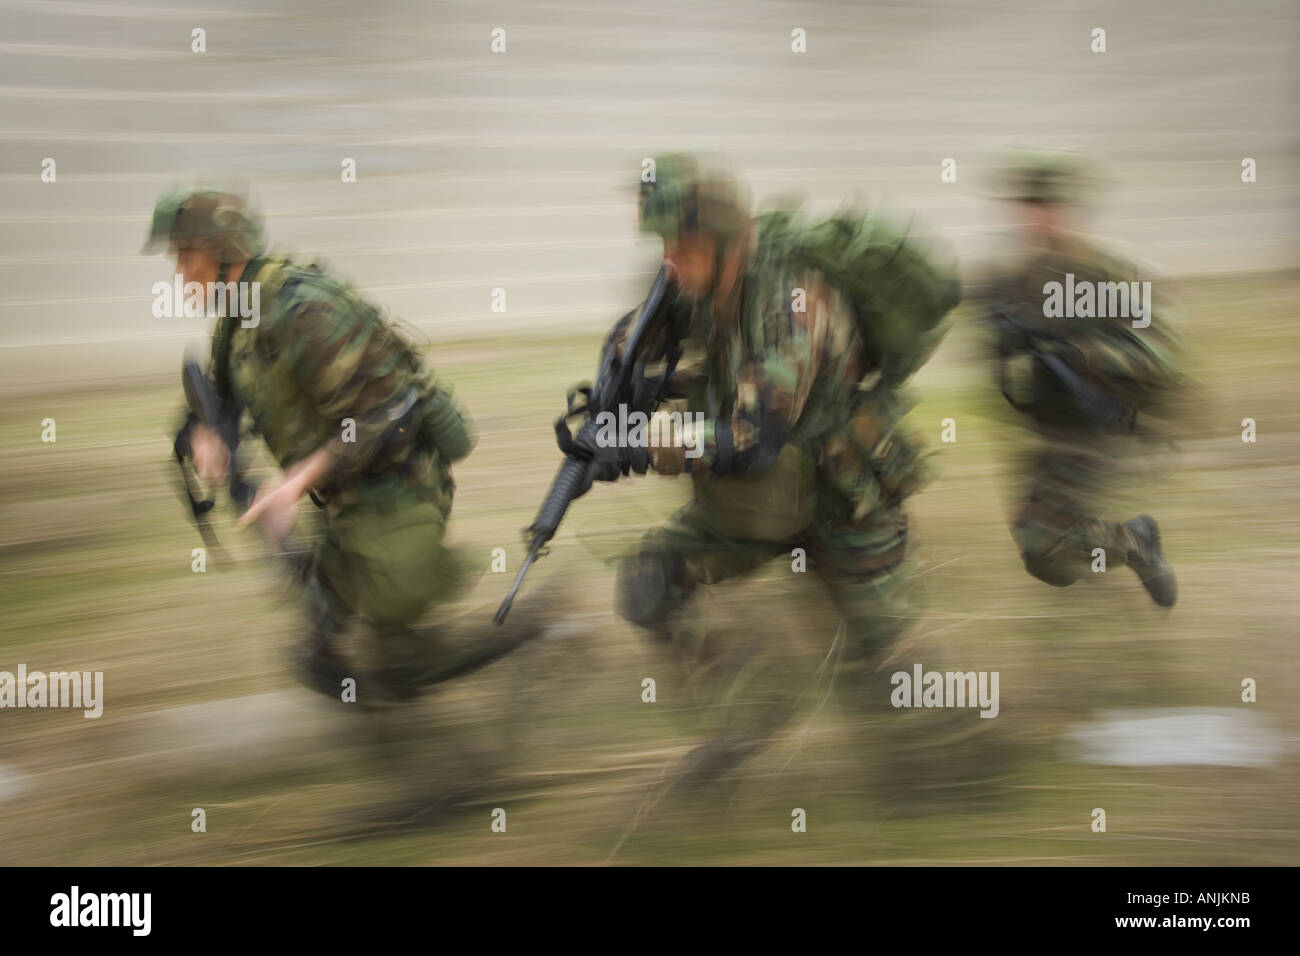 Three soldiers running on the field with their rifles Stock Photo